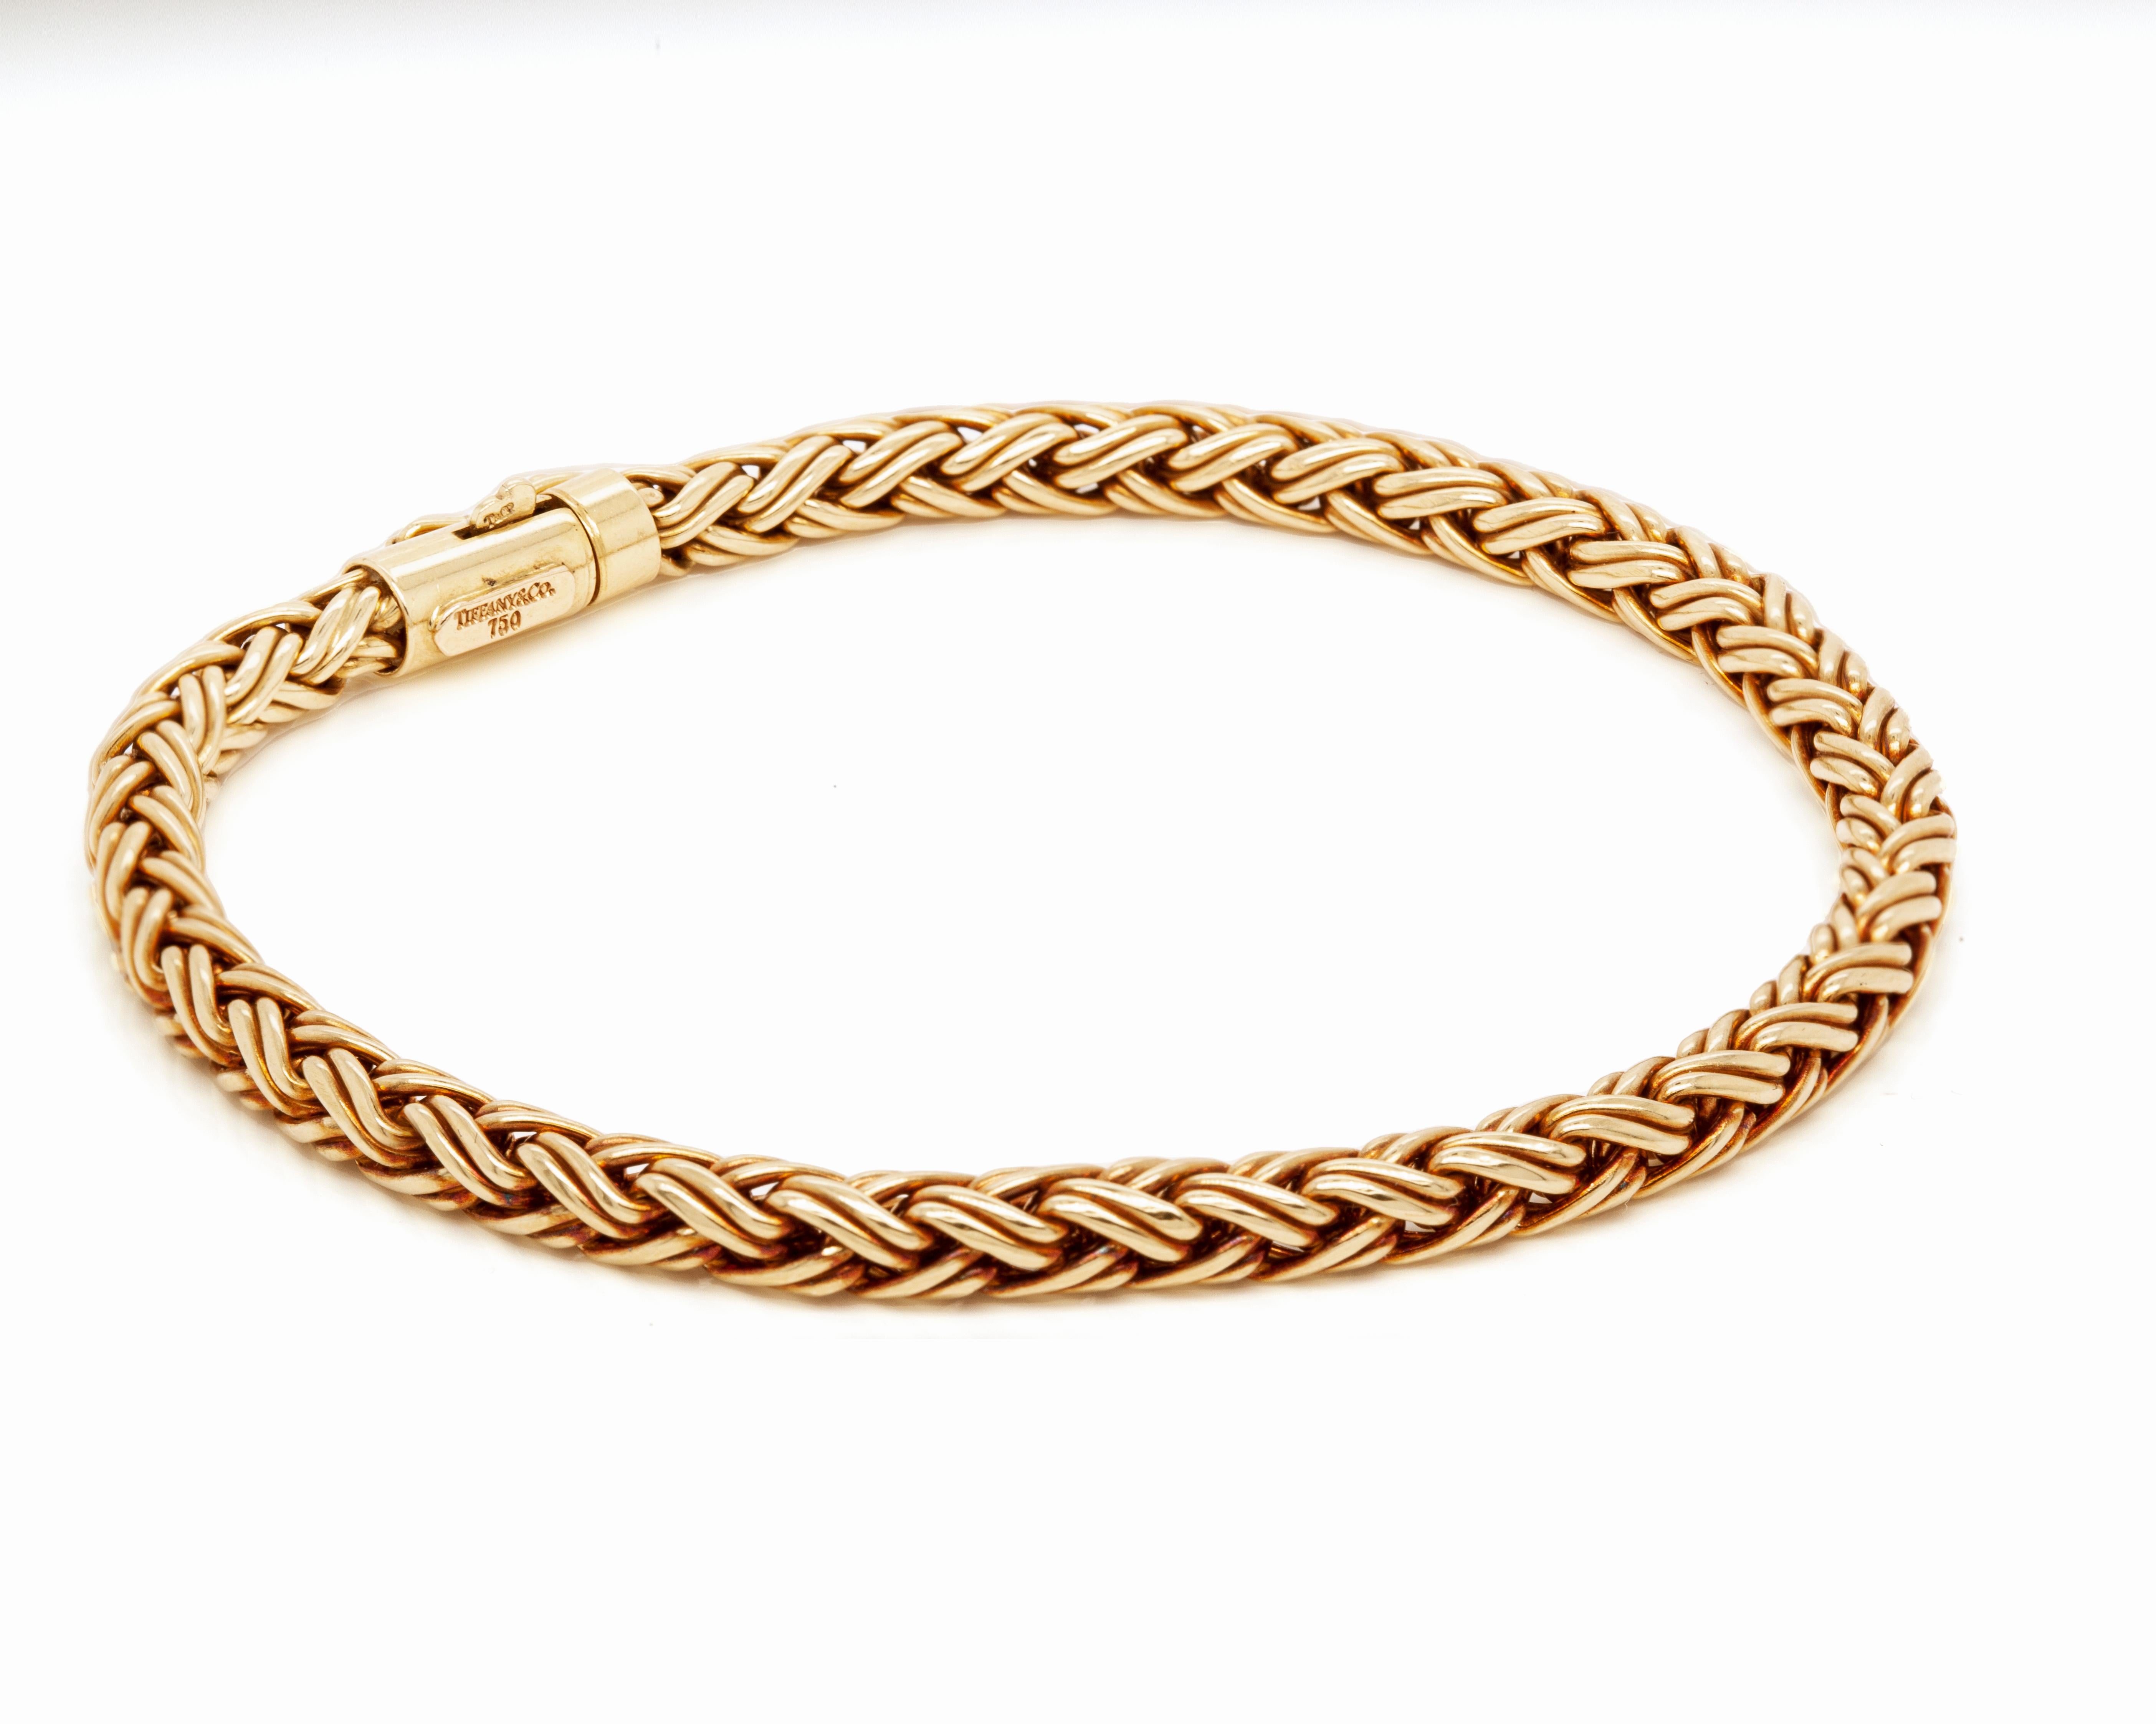 A classic and beautiful chain necklace and bracelet set by Tiffany & Co. masterfully crafted from 18 carat yellow gold.

Both necklace and bracelet feature a braided round wheat chain design and are perfectly secured with a tube box clasp. Measuring